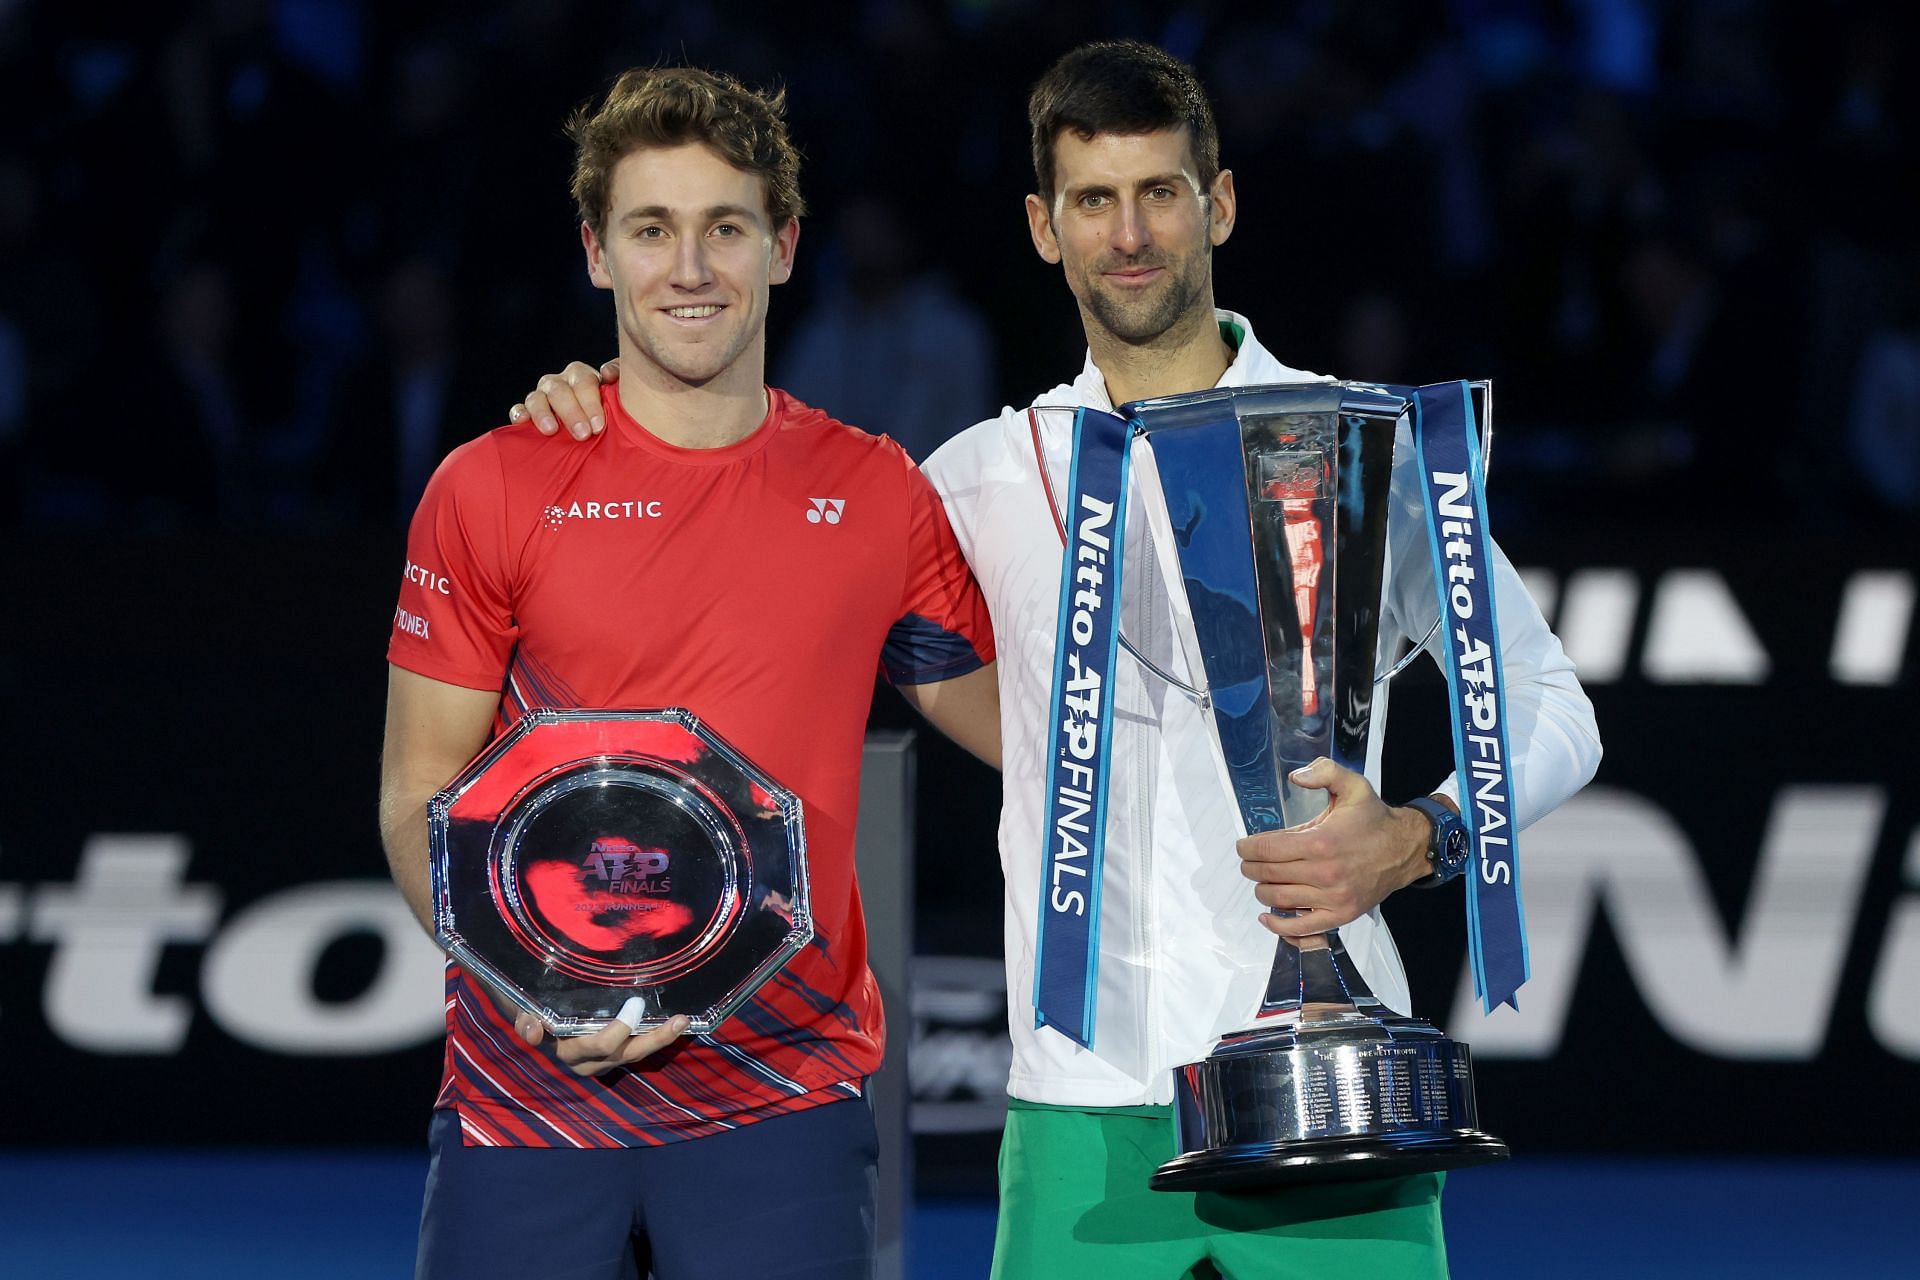 Casper Ruud and Novak Djokovic pose with their trophies at the 2022 ATP Finals